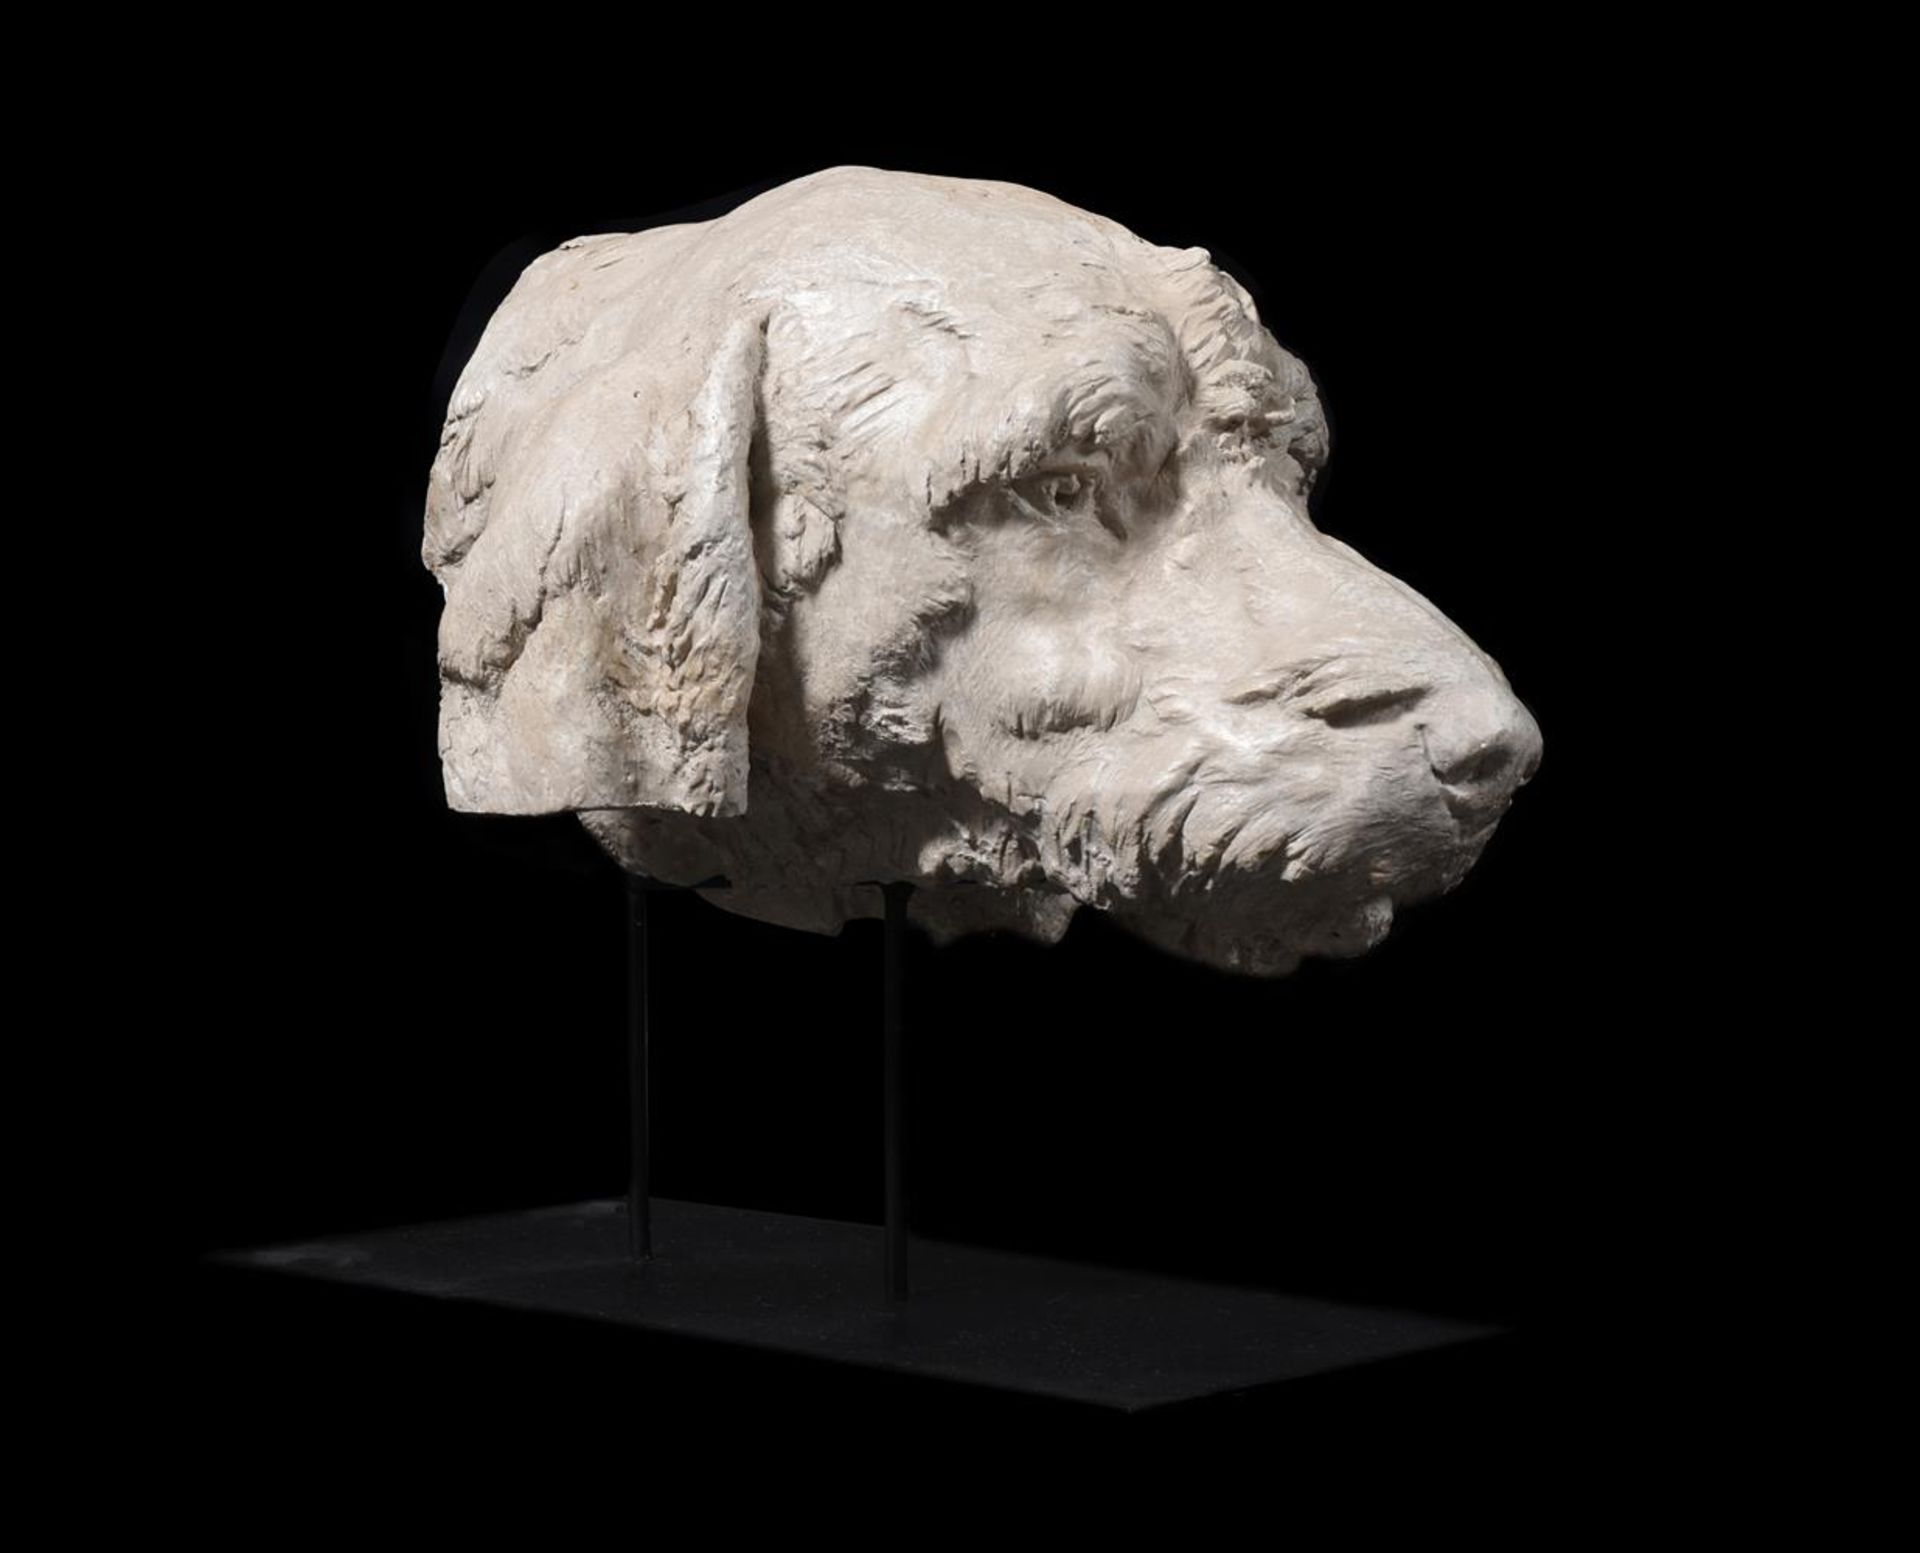 A PLASTER MODEL OF THE HEAD OF A HOUND, 20TH CENTURY - Image 3 of 4